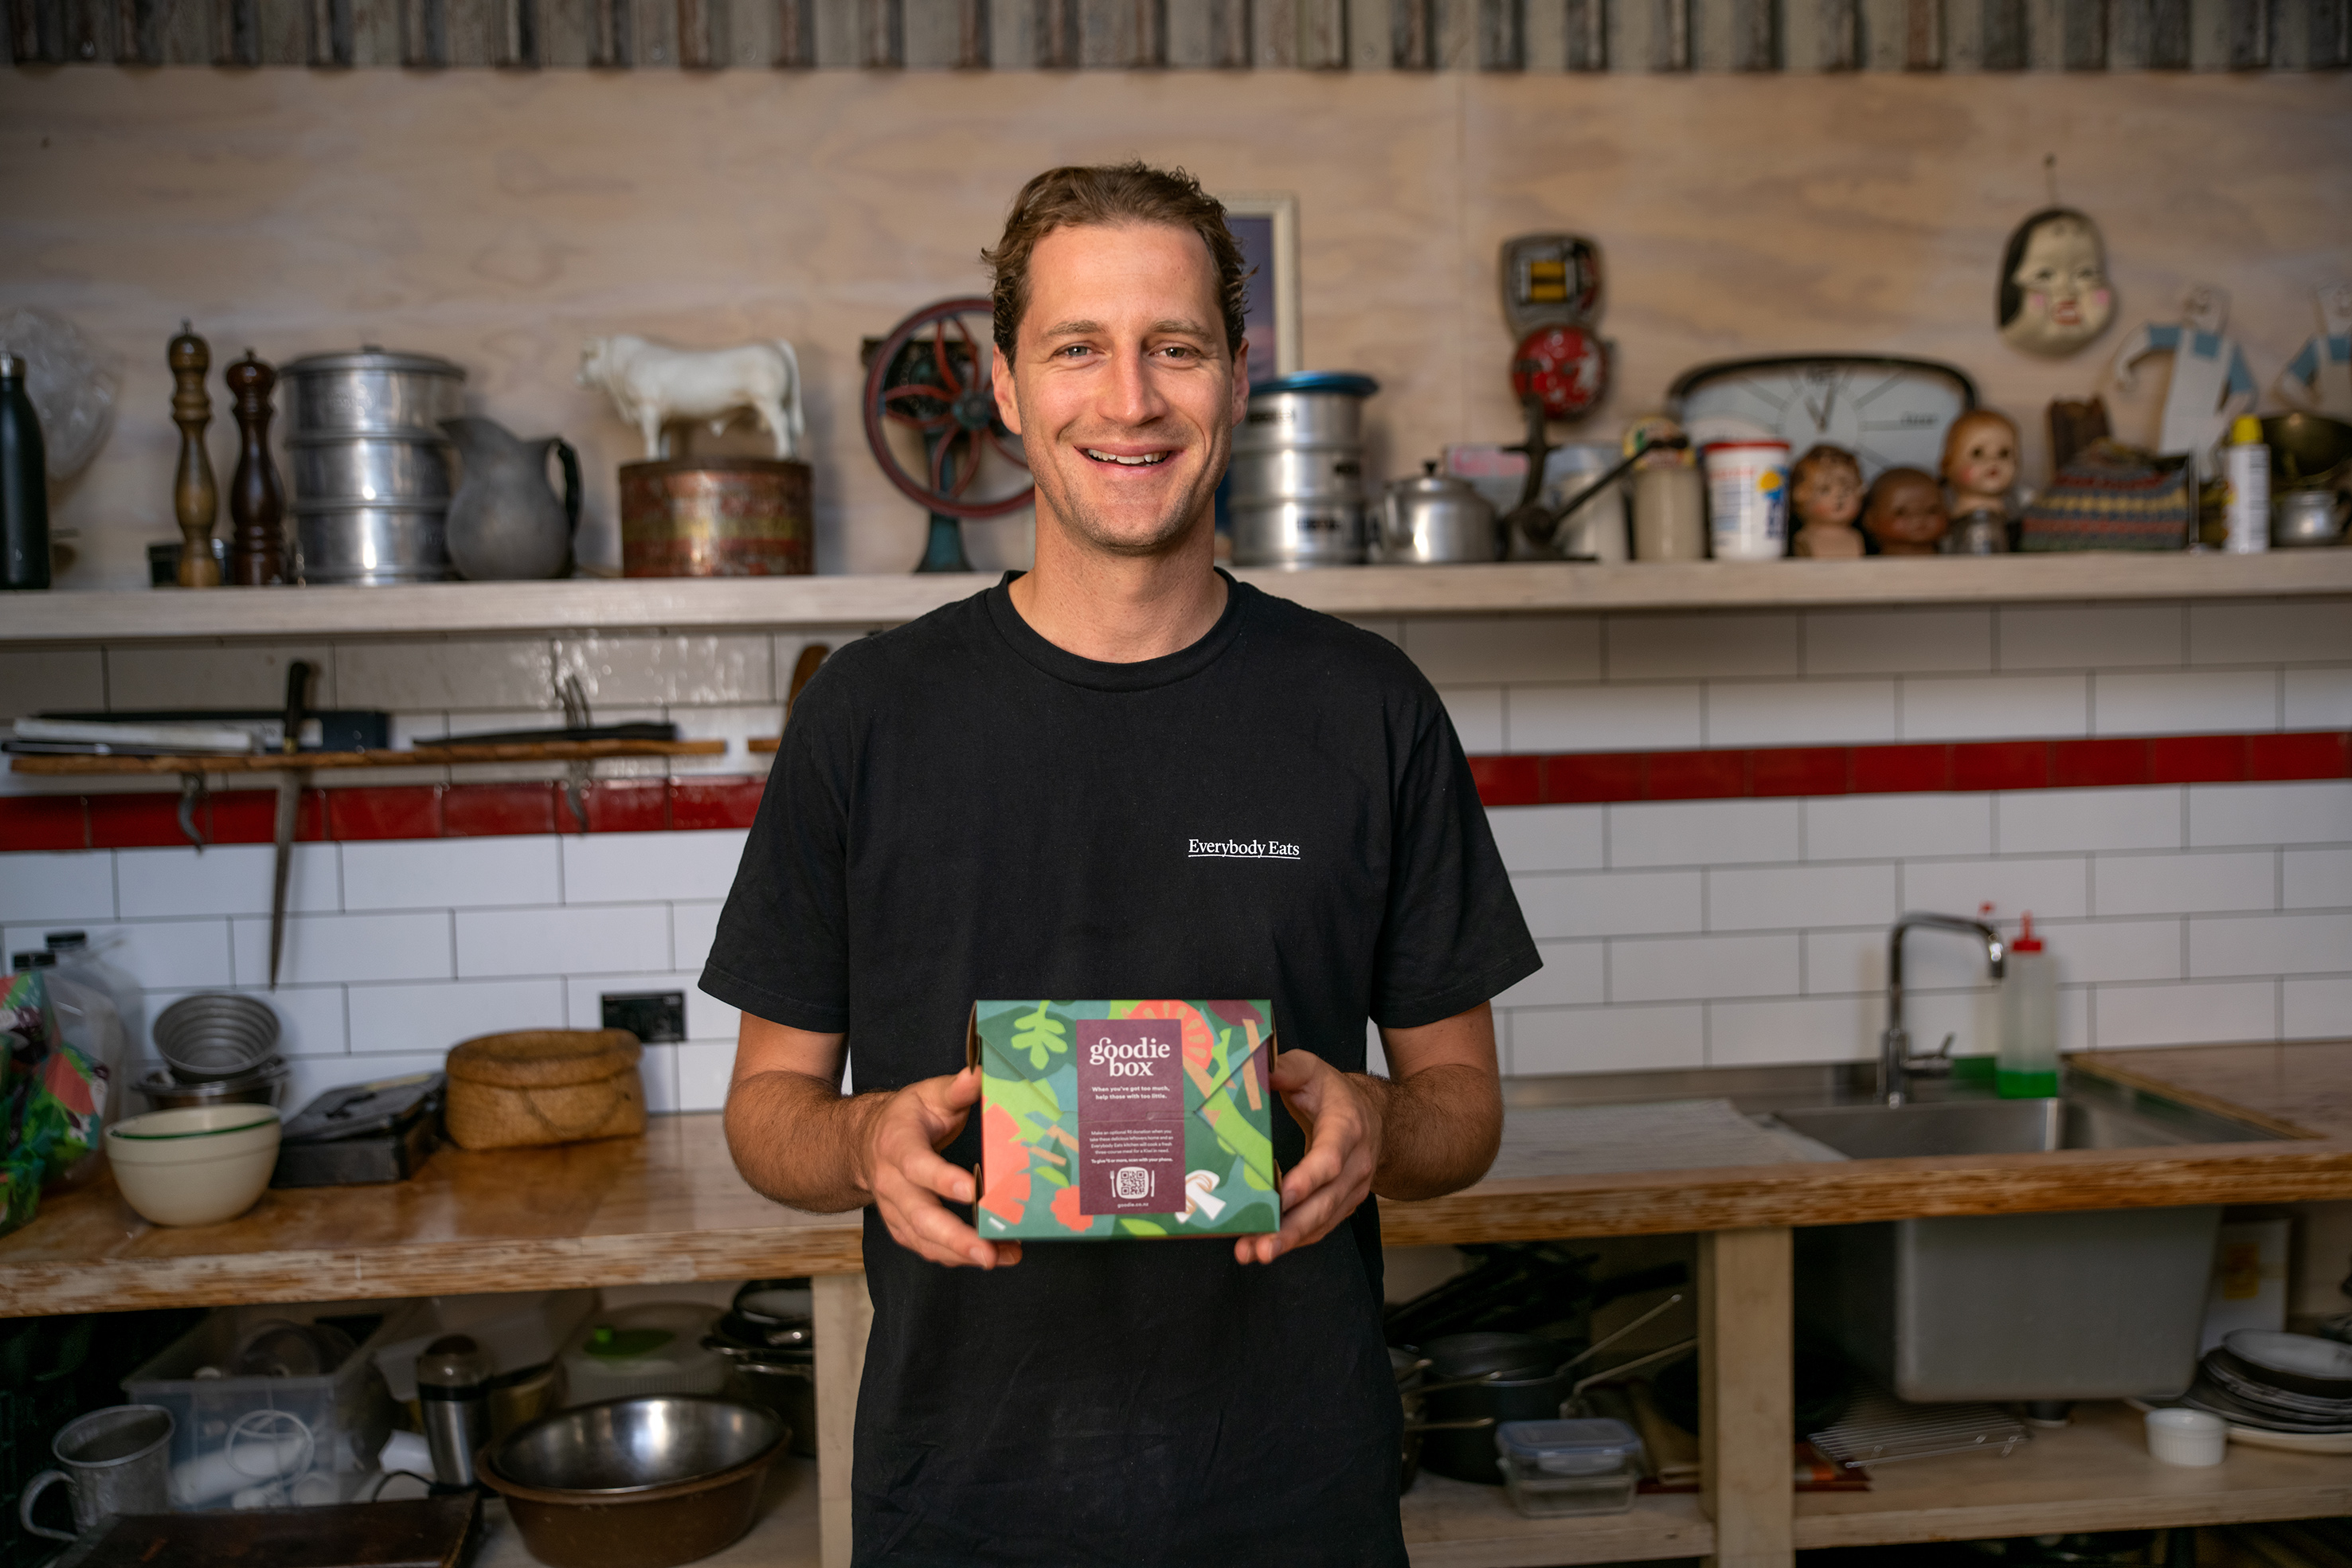 Nick Loosley, founder of Everybody Eats, holding a goodie box